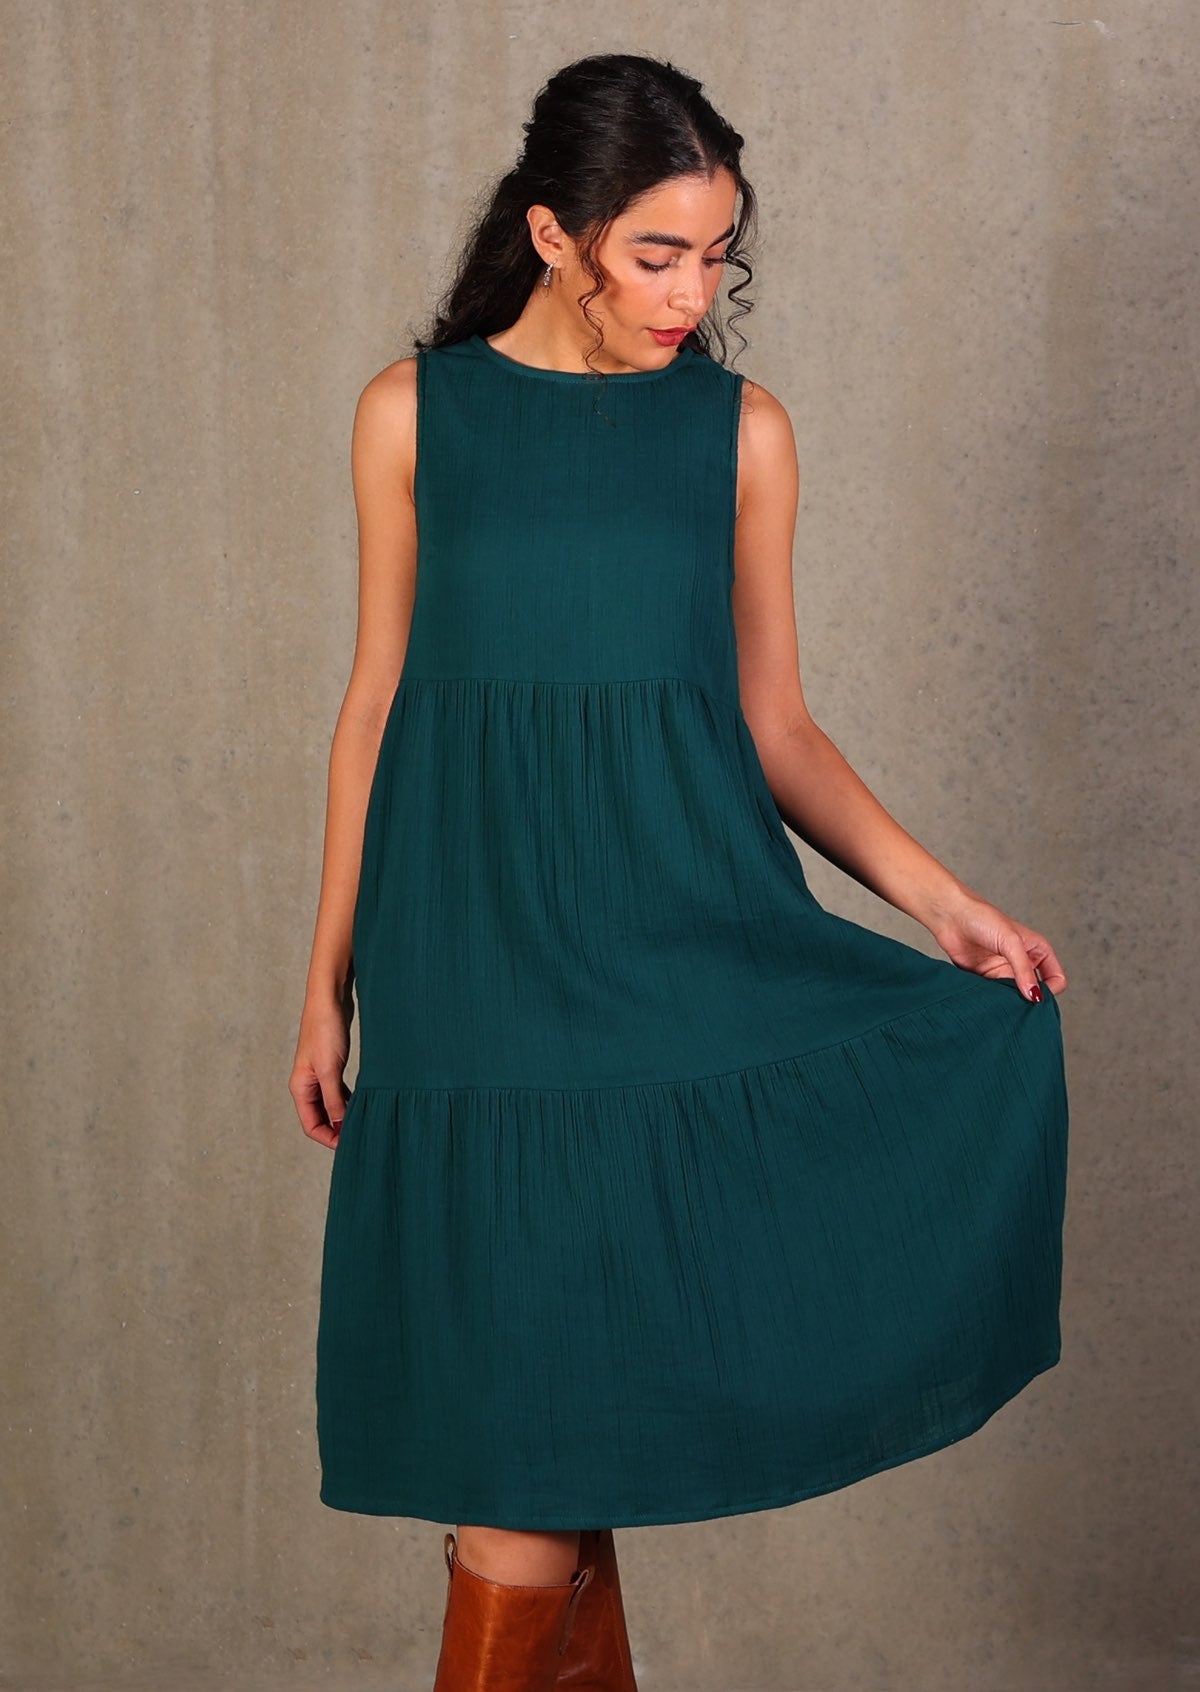 Tiered sleeveless dress made from two layers of lightweight cotton gauze in superb deep teal colour